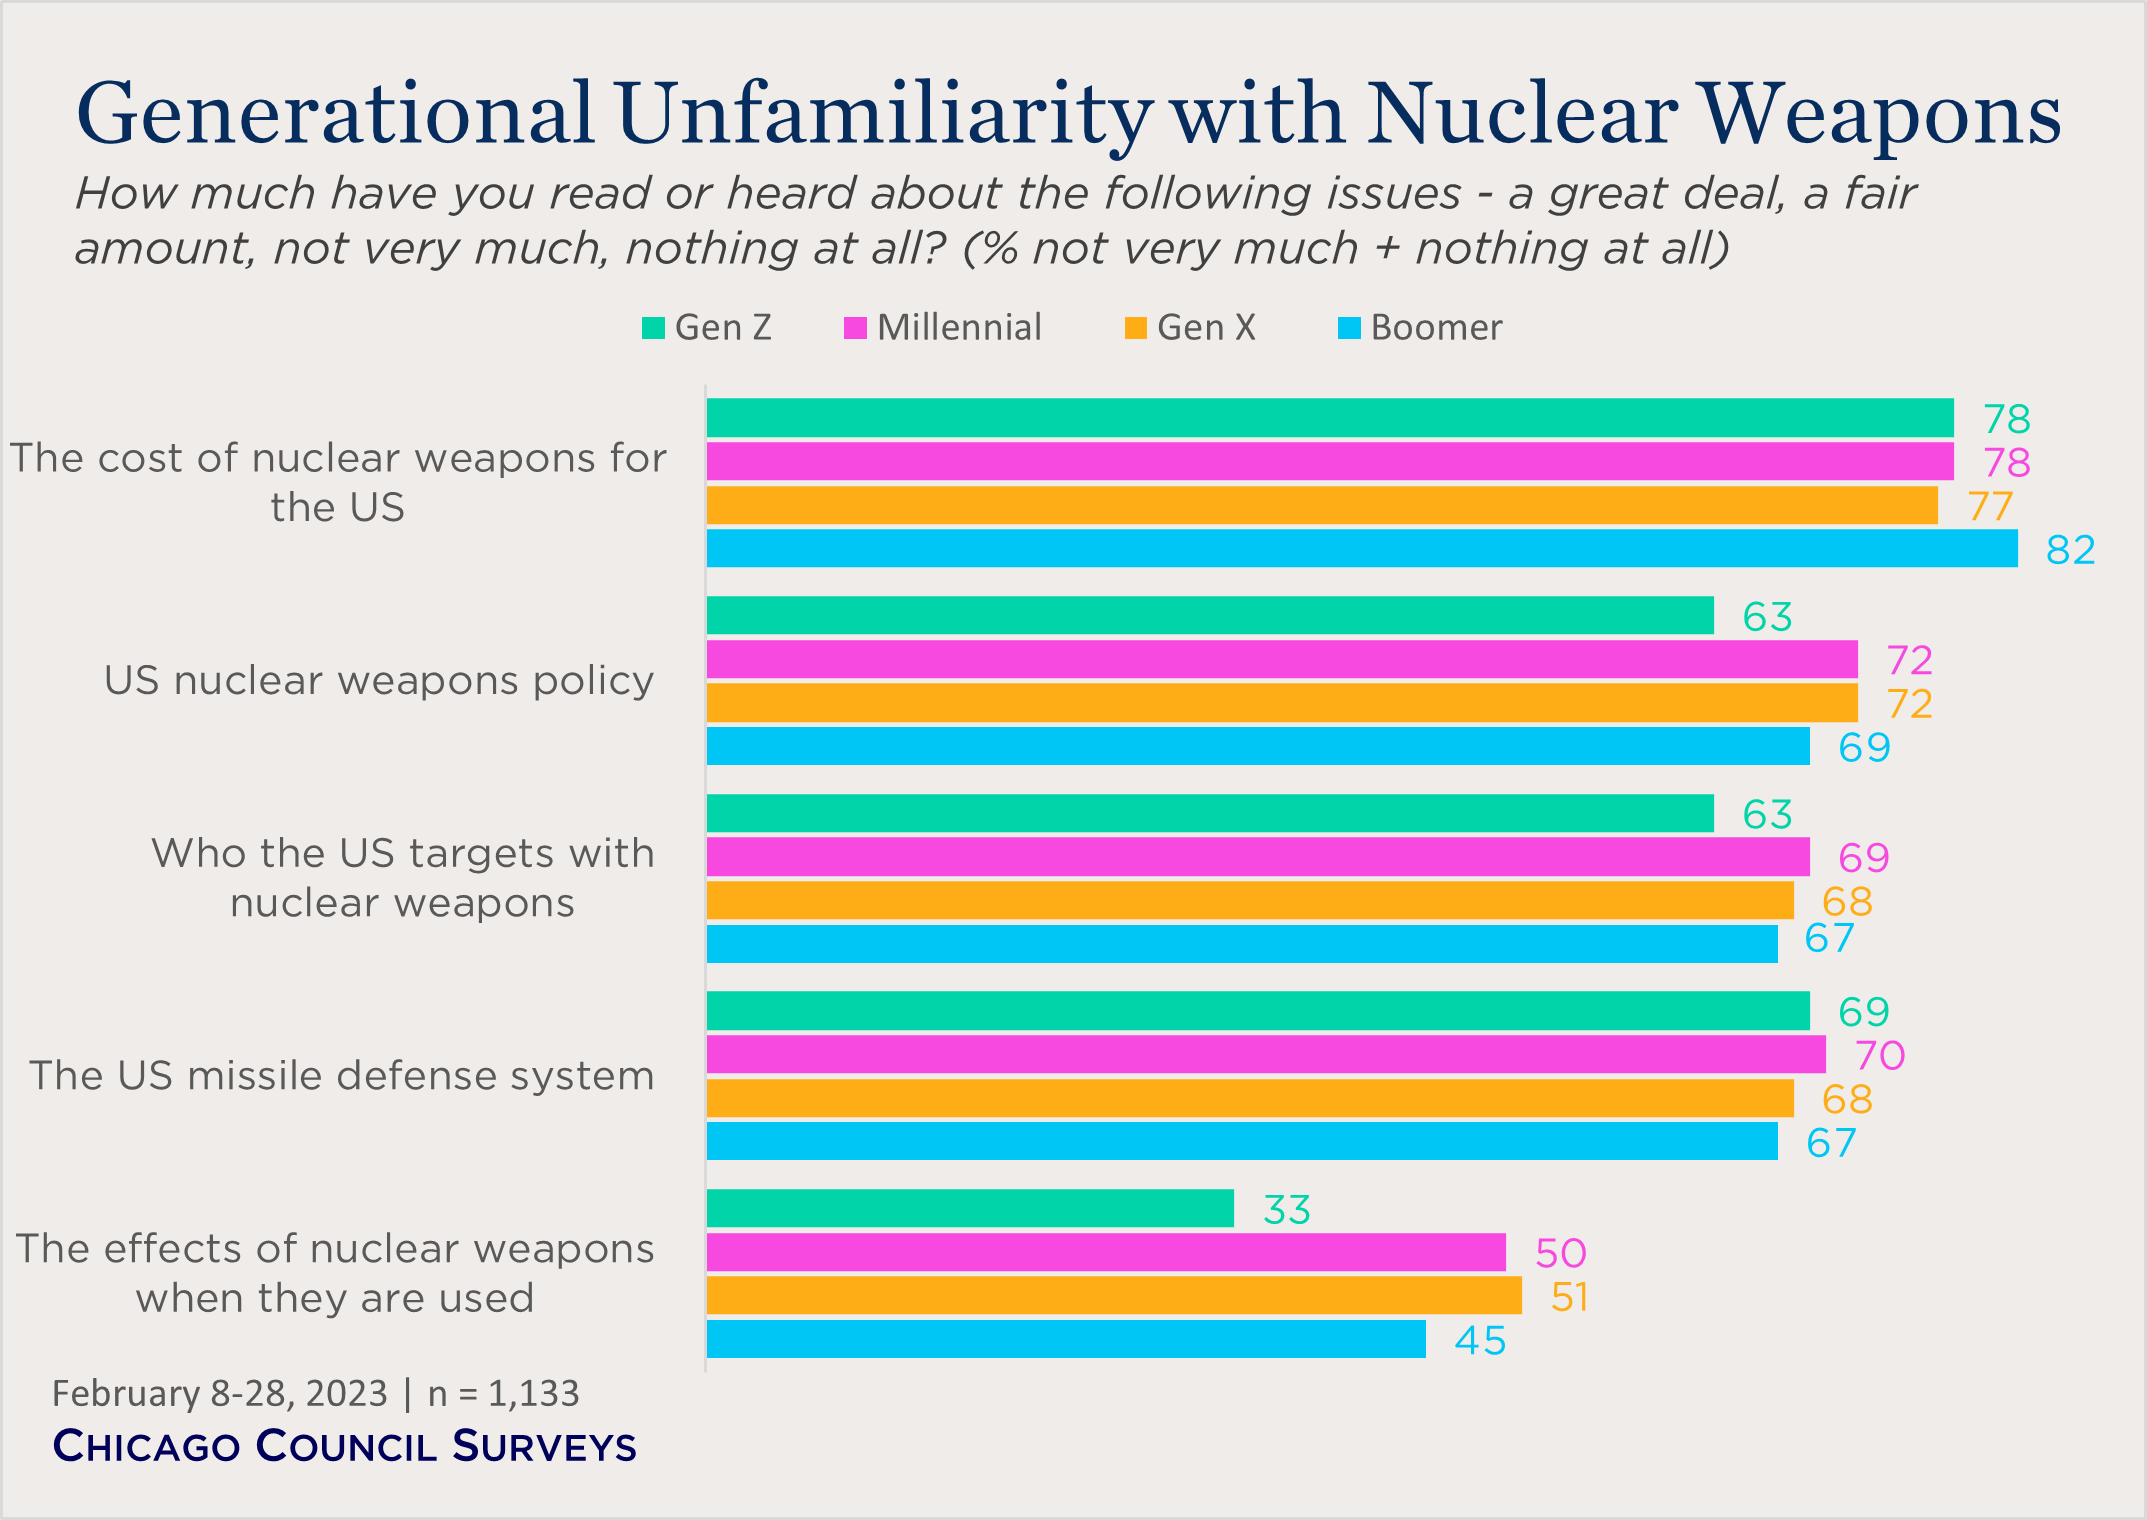 "bar chart showing generational unfamiliarity with nuclear weapons"